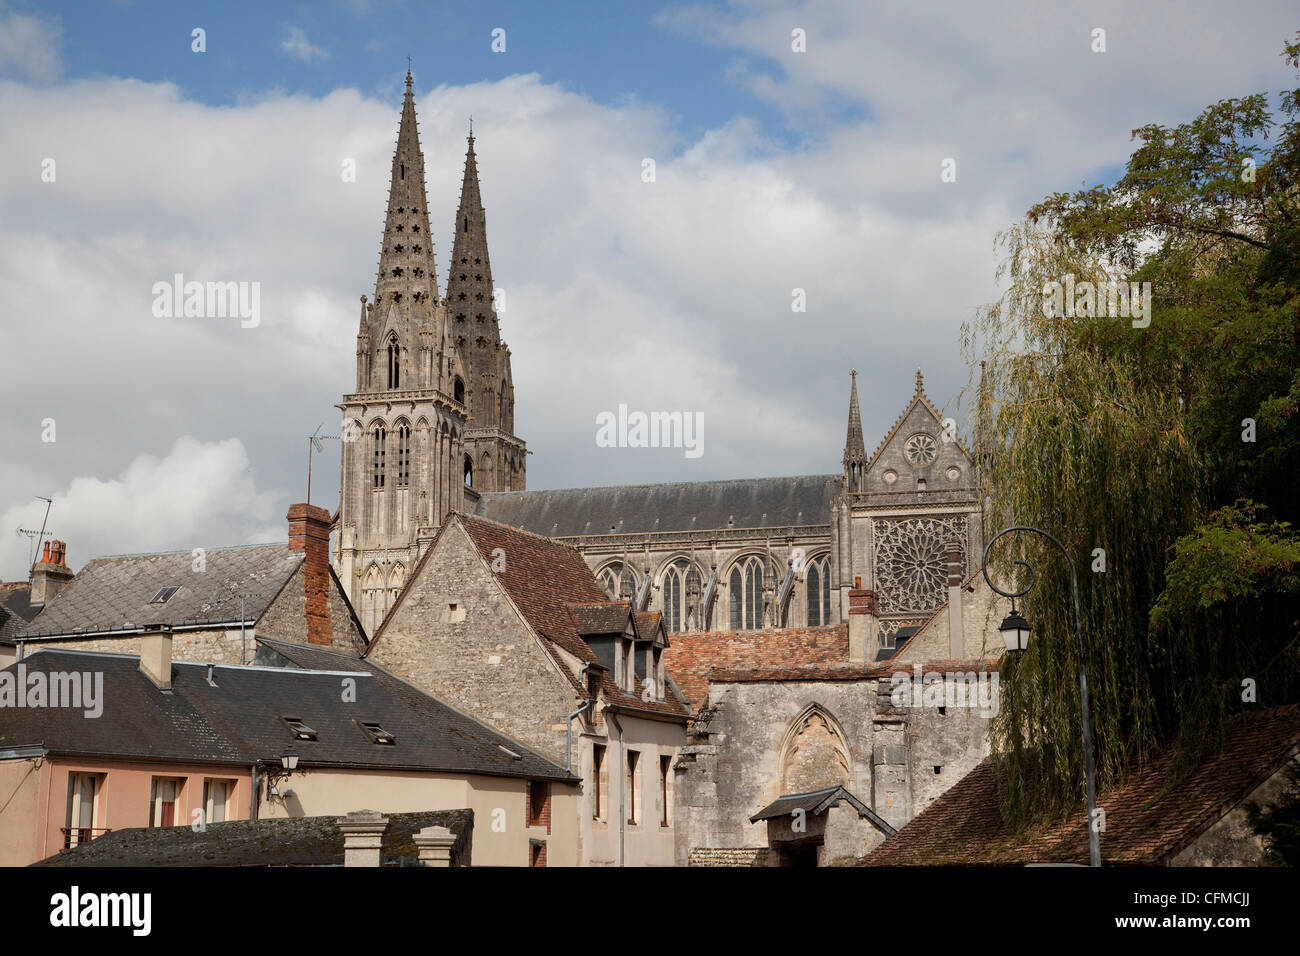 Cathedral spires seen over old houses, Sees, Lower Normandy, France, Europe Stock Photo